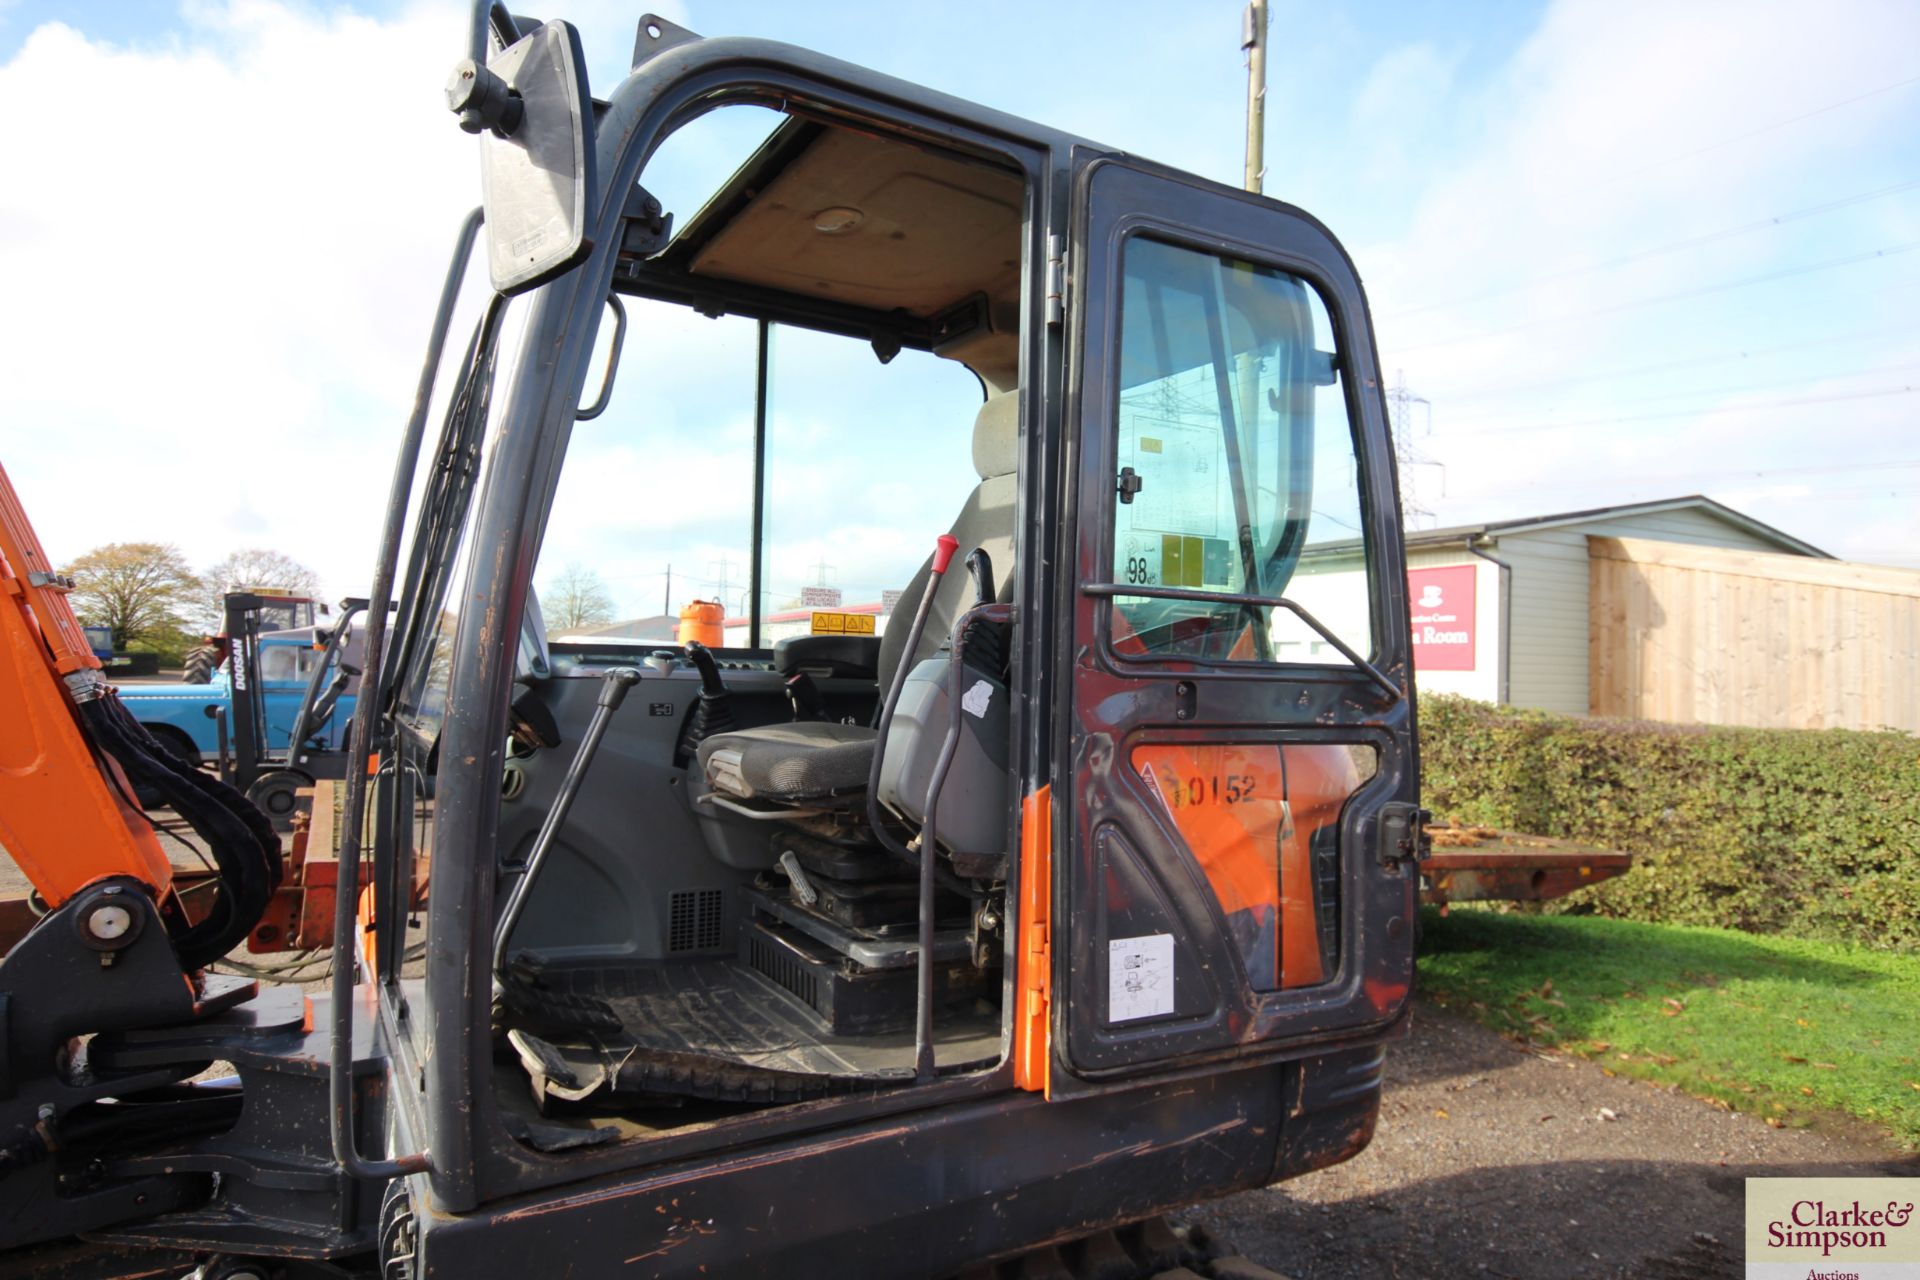 Doosan DX55E 5.5T excavator. 2011. 5,045 hours. Serial number 50461. With new rubber tracks 50 hours - Image 53 of 68